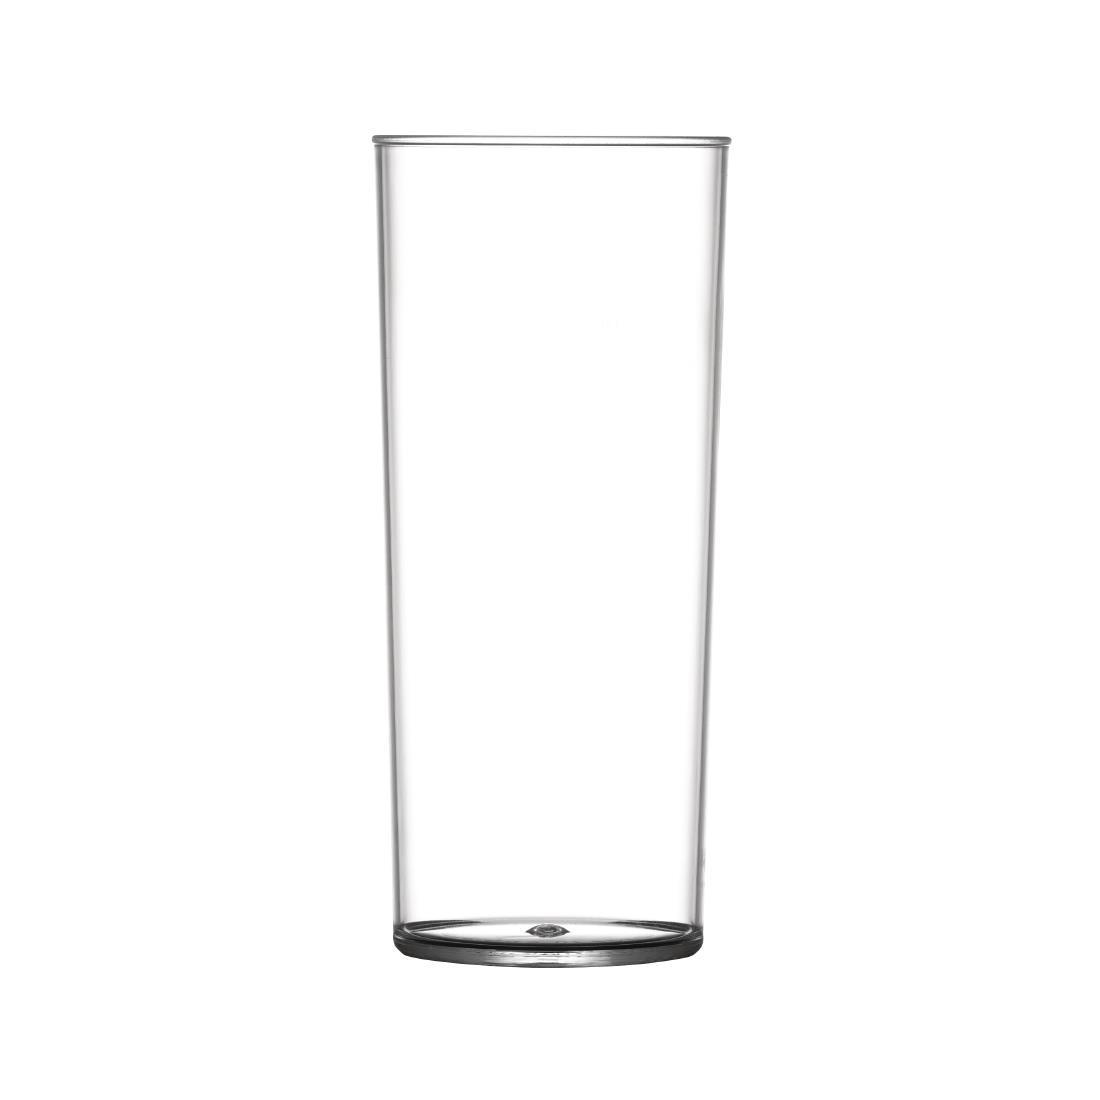 BBP Polycarbonate Hi Ball Glasses 340ml CE Marked (Pack of 48) - U405  - 1